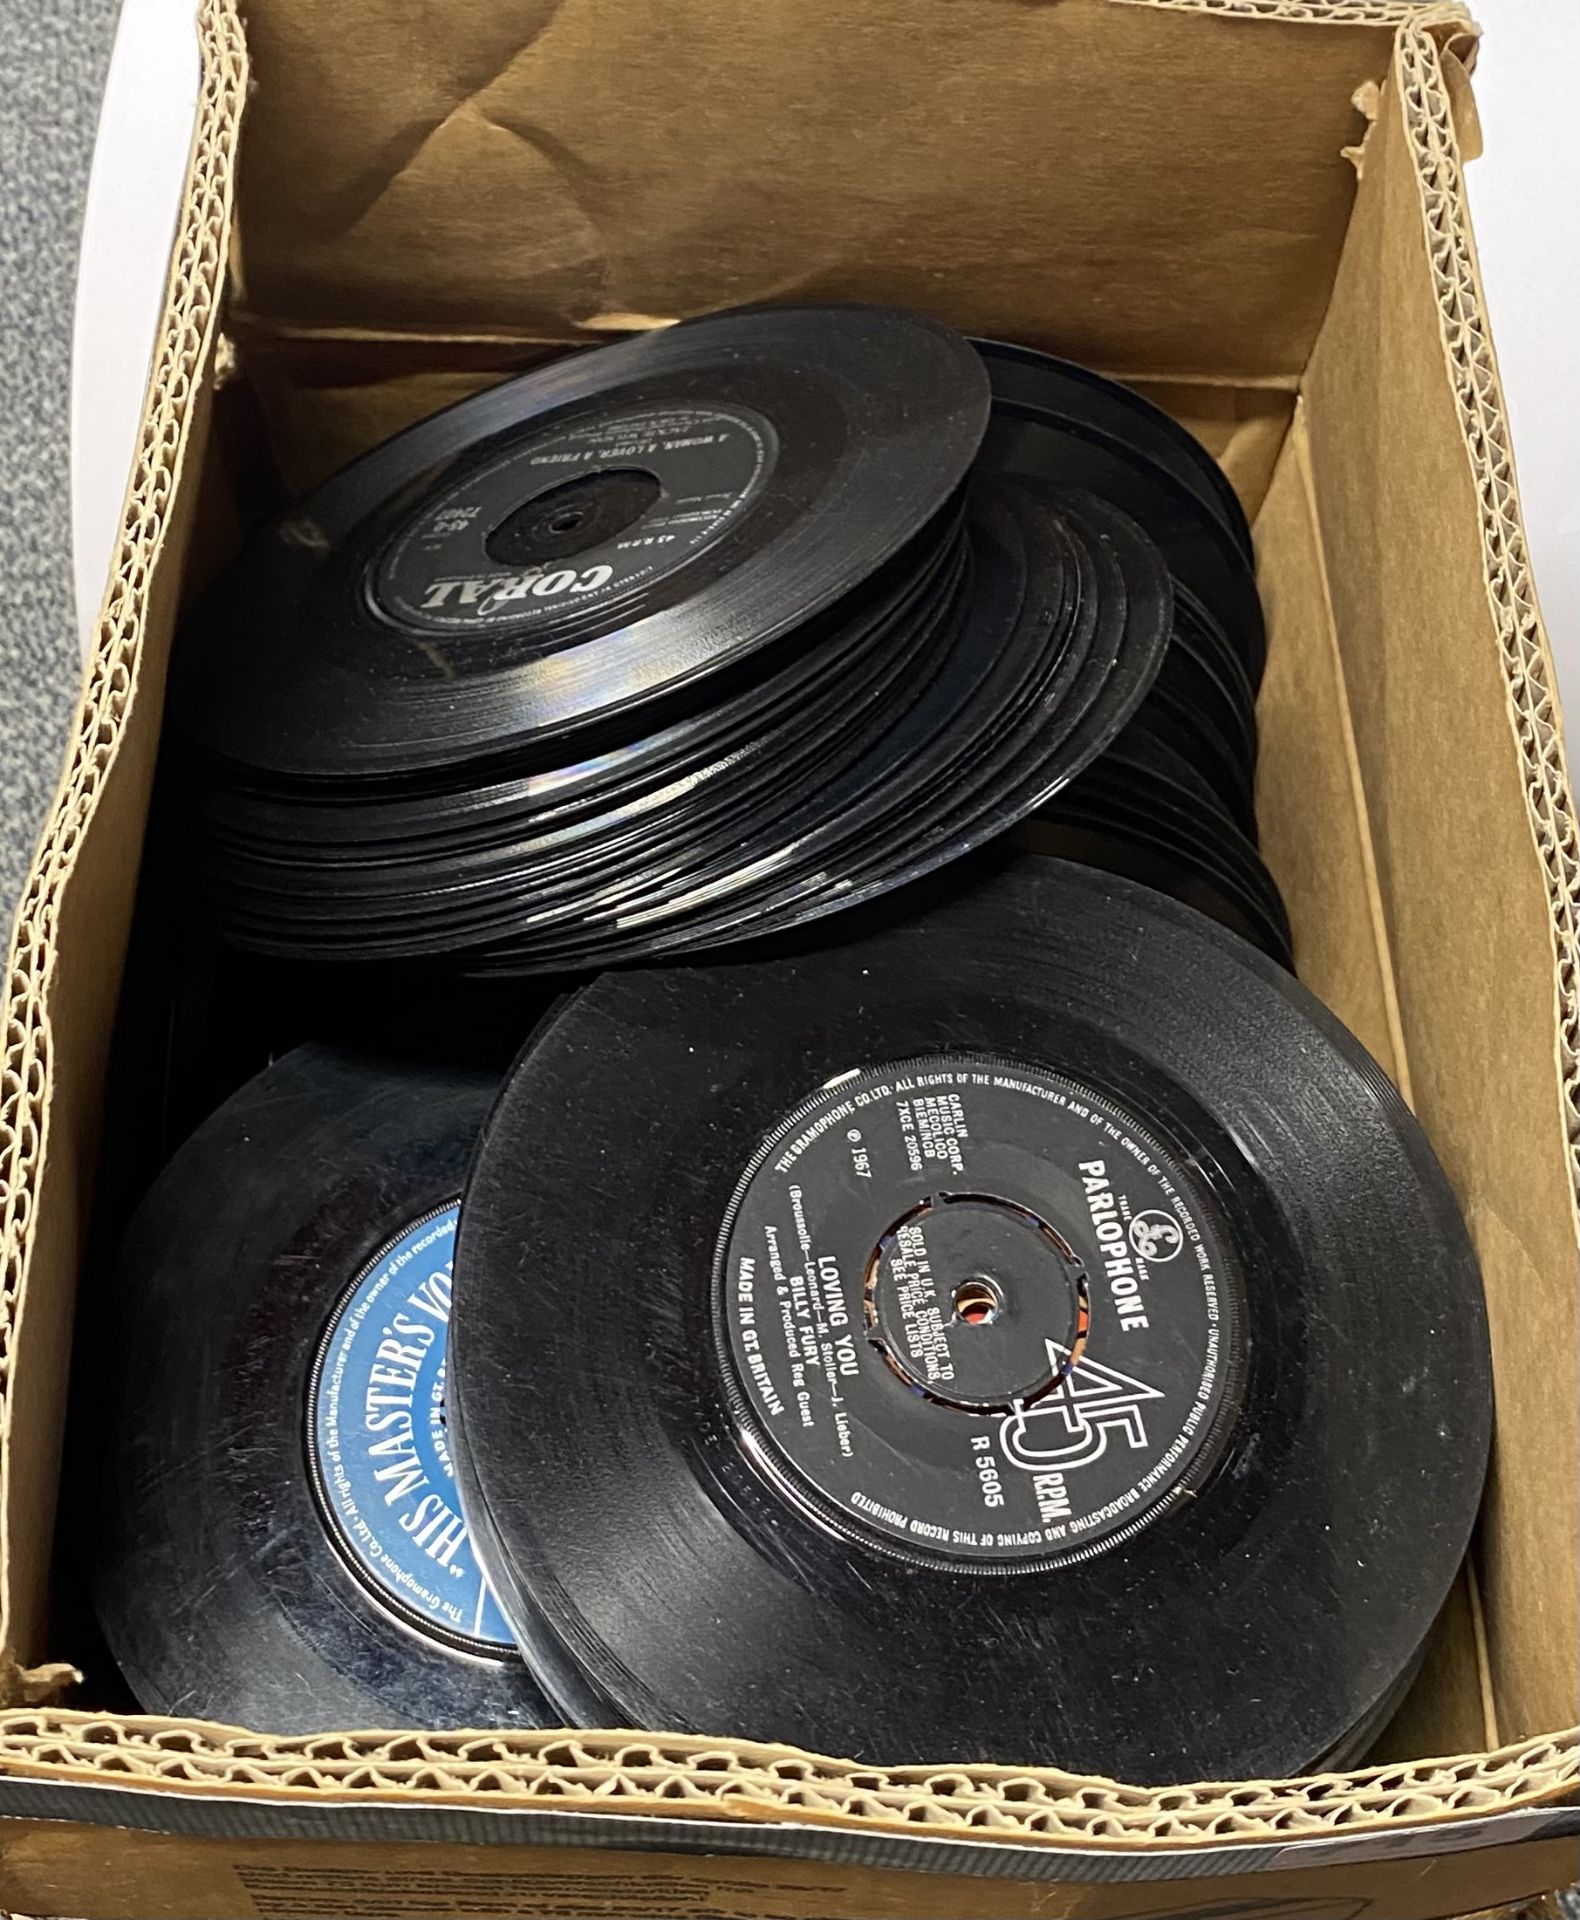 A box containing approx. three hundred 45-RPM single records from the 50's to the 80's.